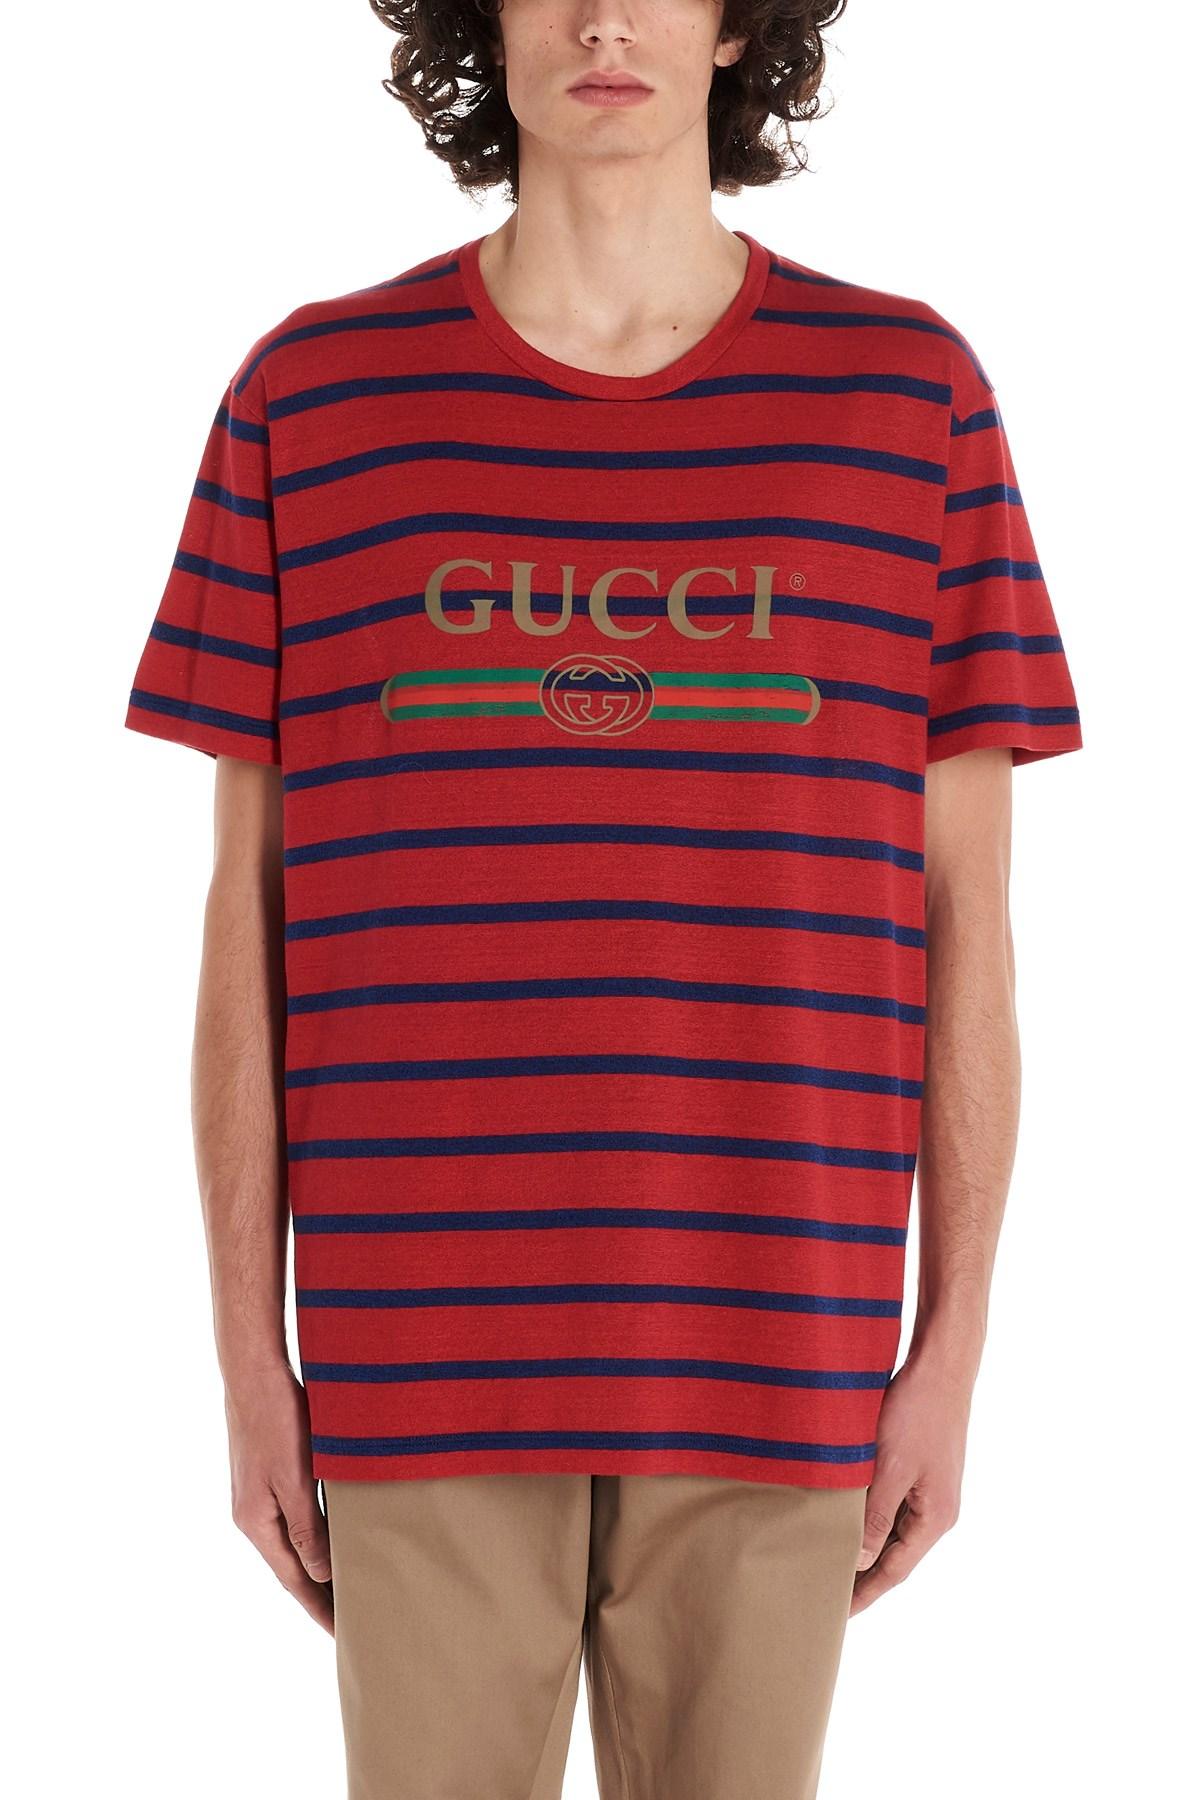 Gucci Logo Striped T-shirt in Red for Men - Lyst